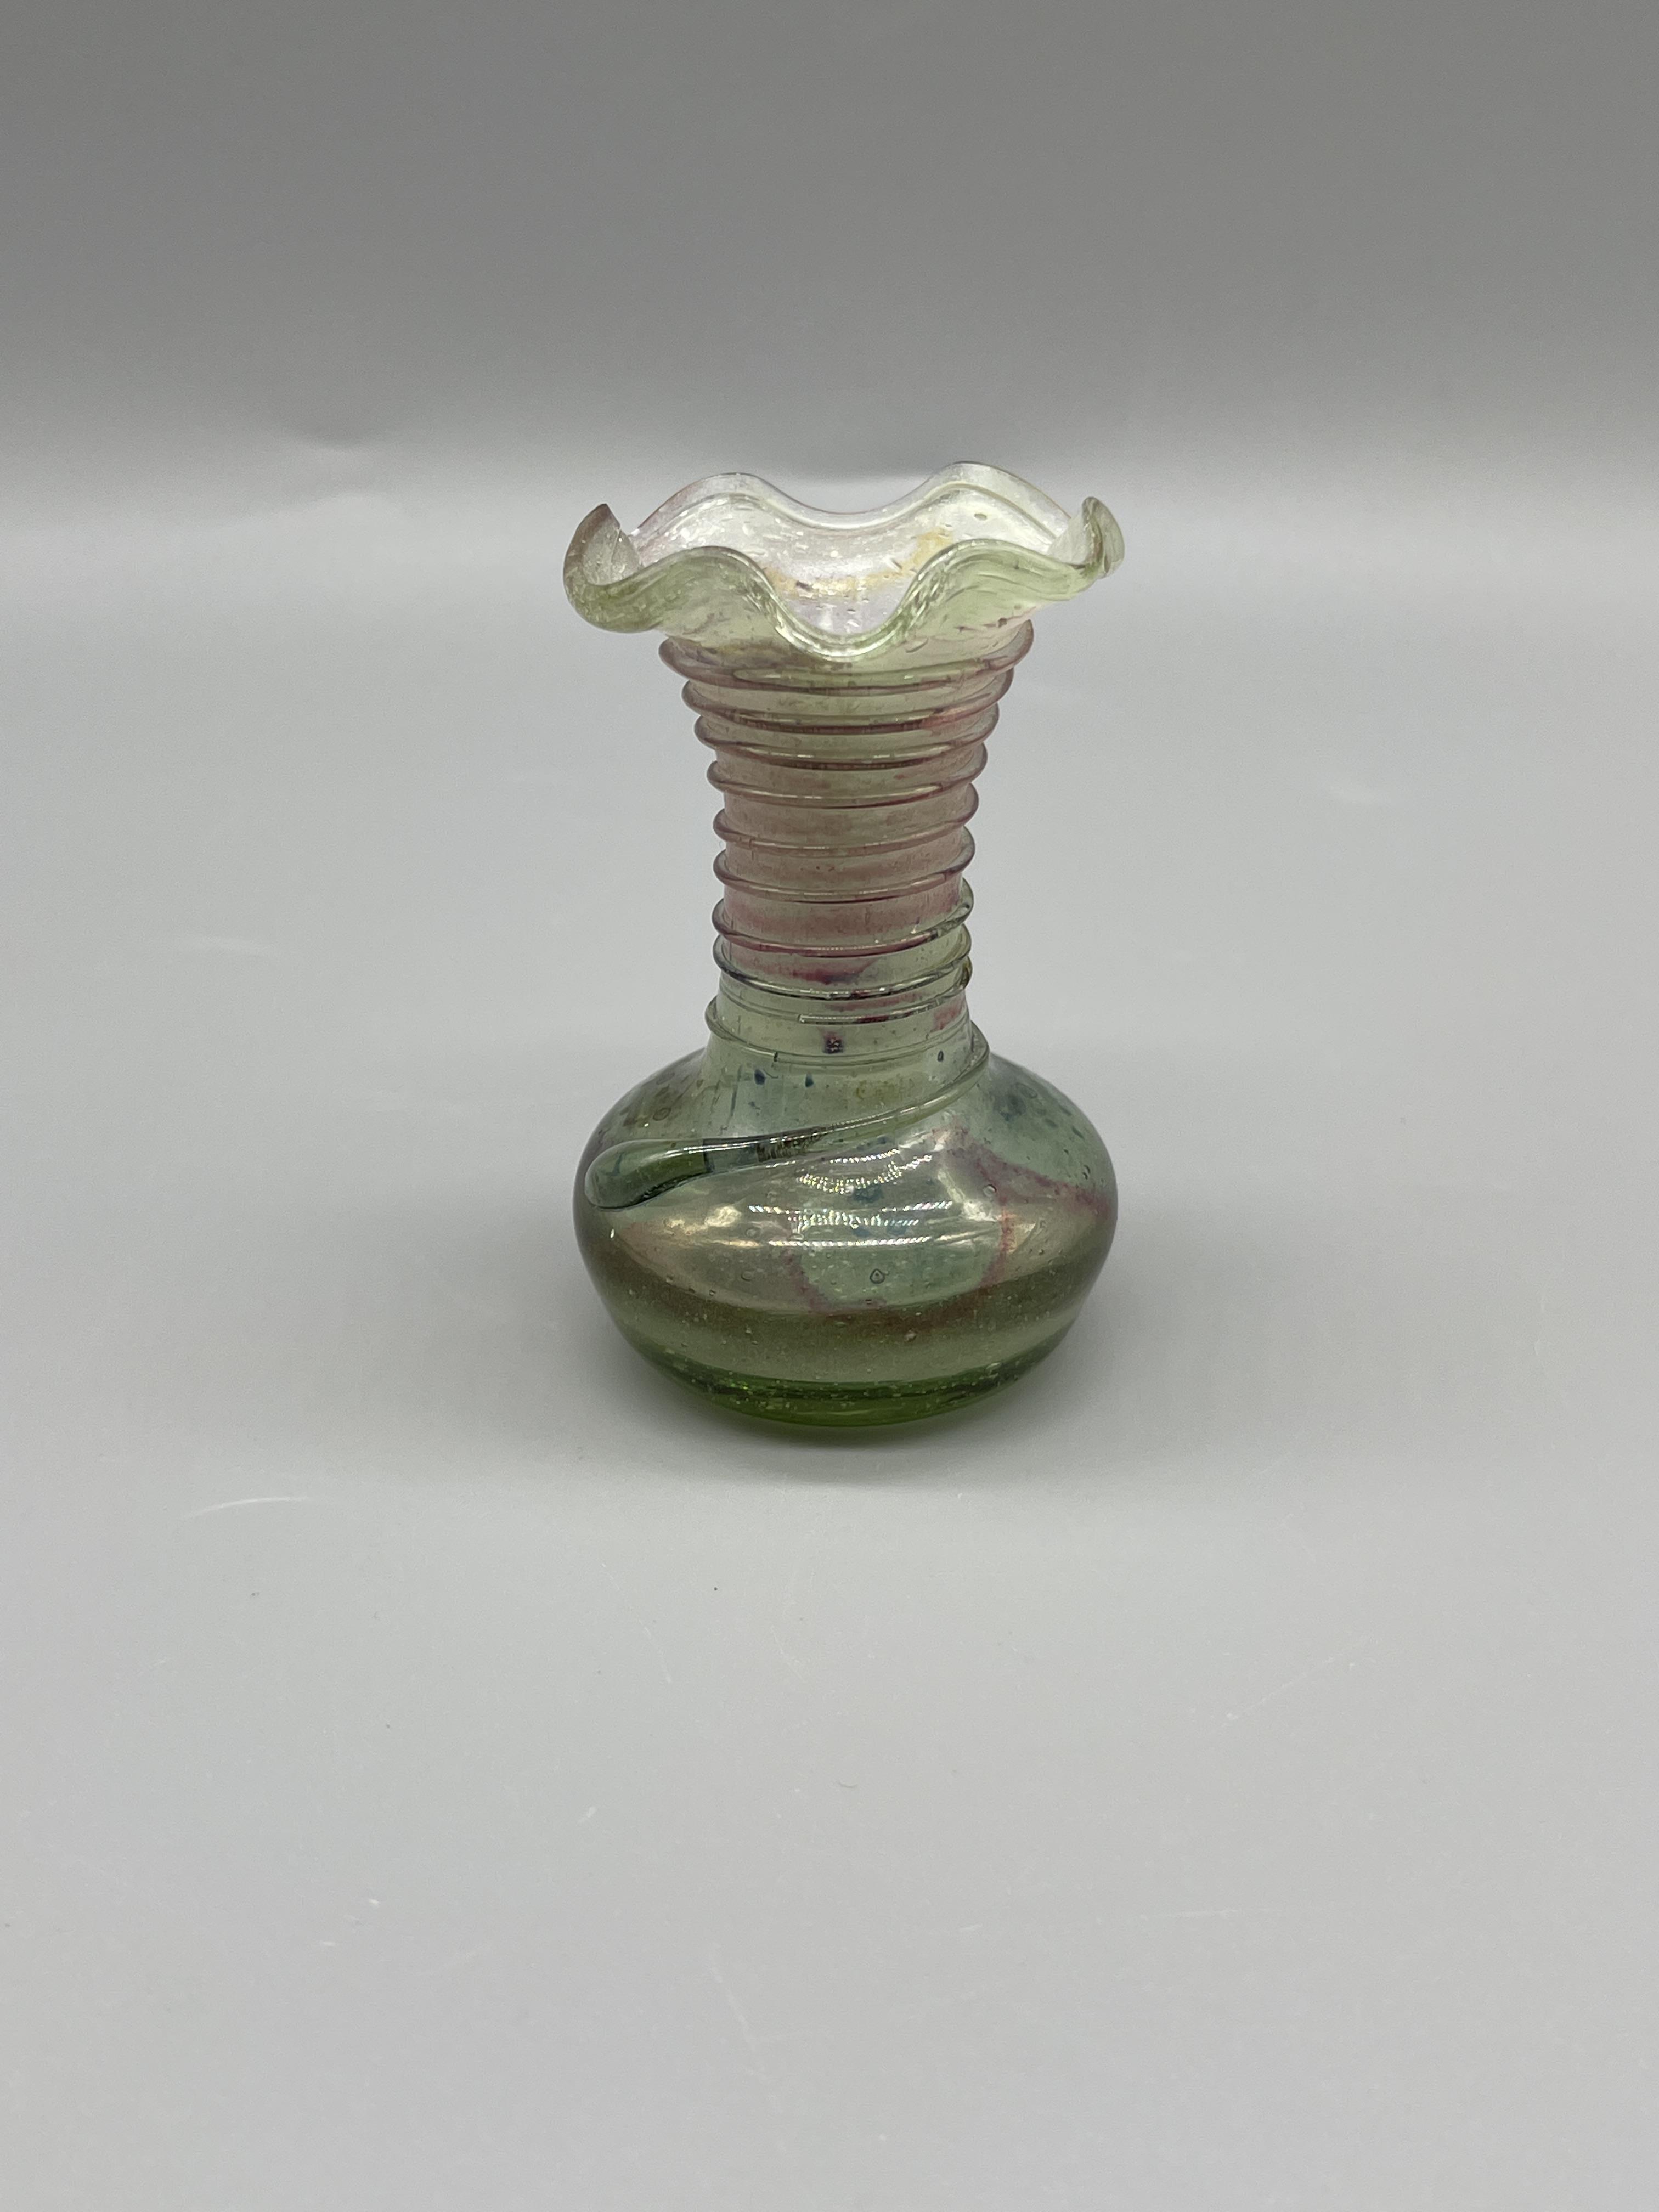 Small Roman Glass Style Vase. Approximately 2inche